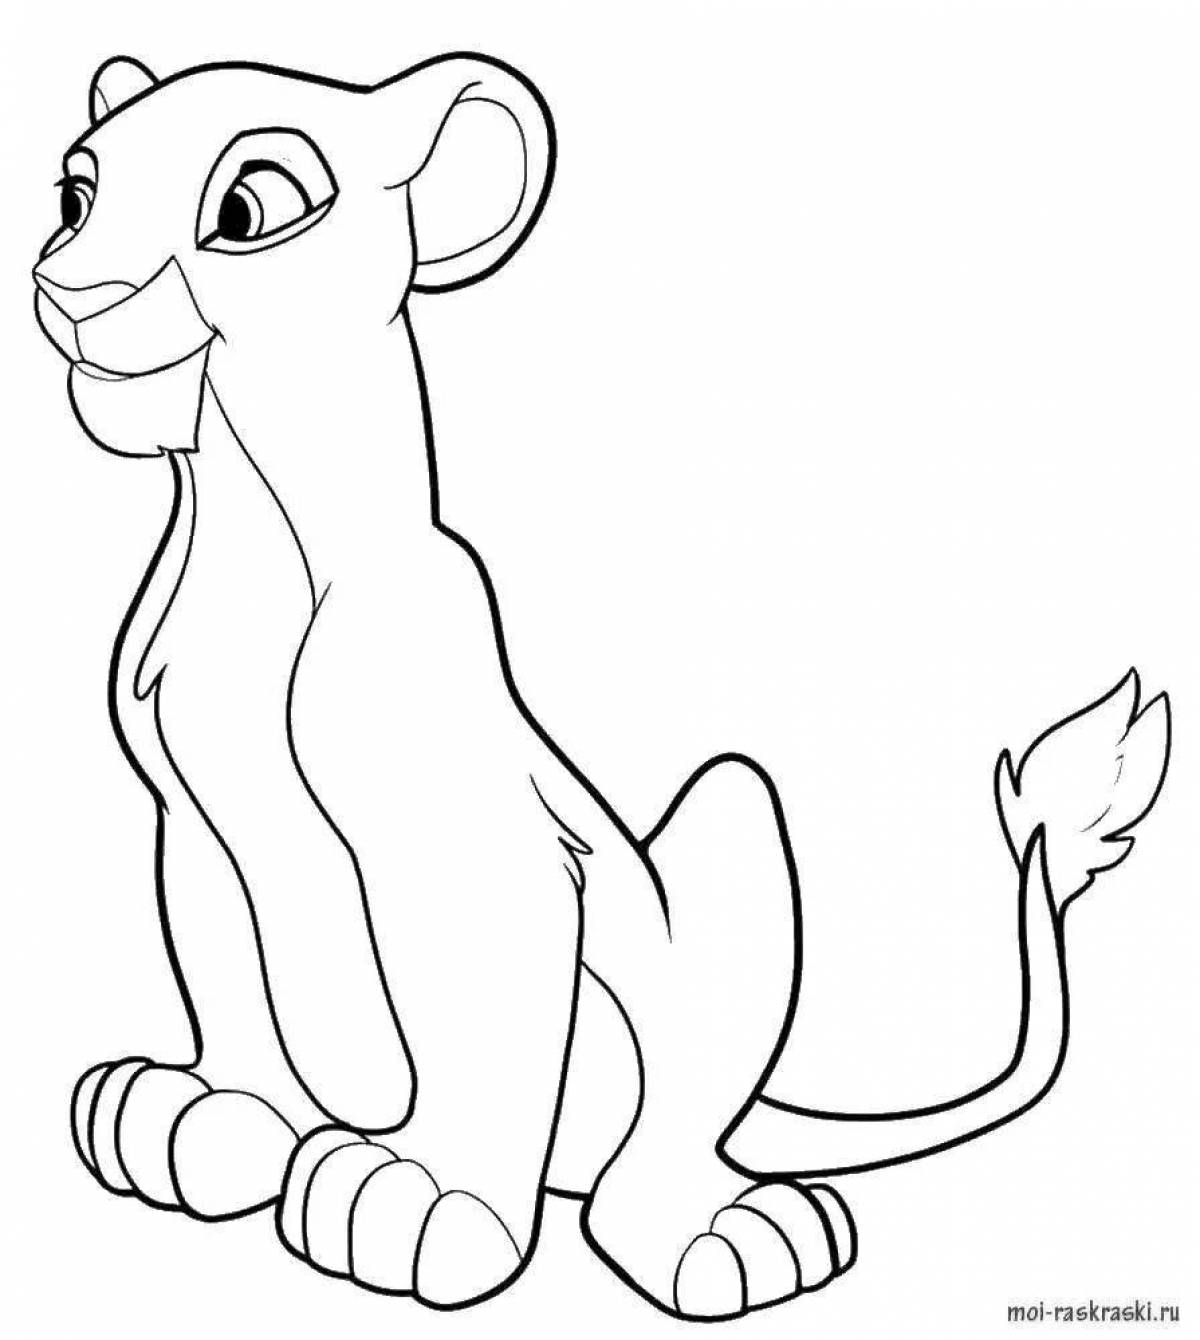 Coloring page of the outgoing meerkat